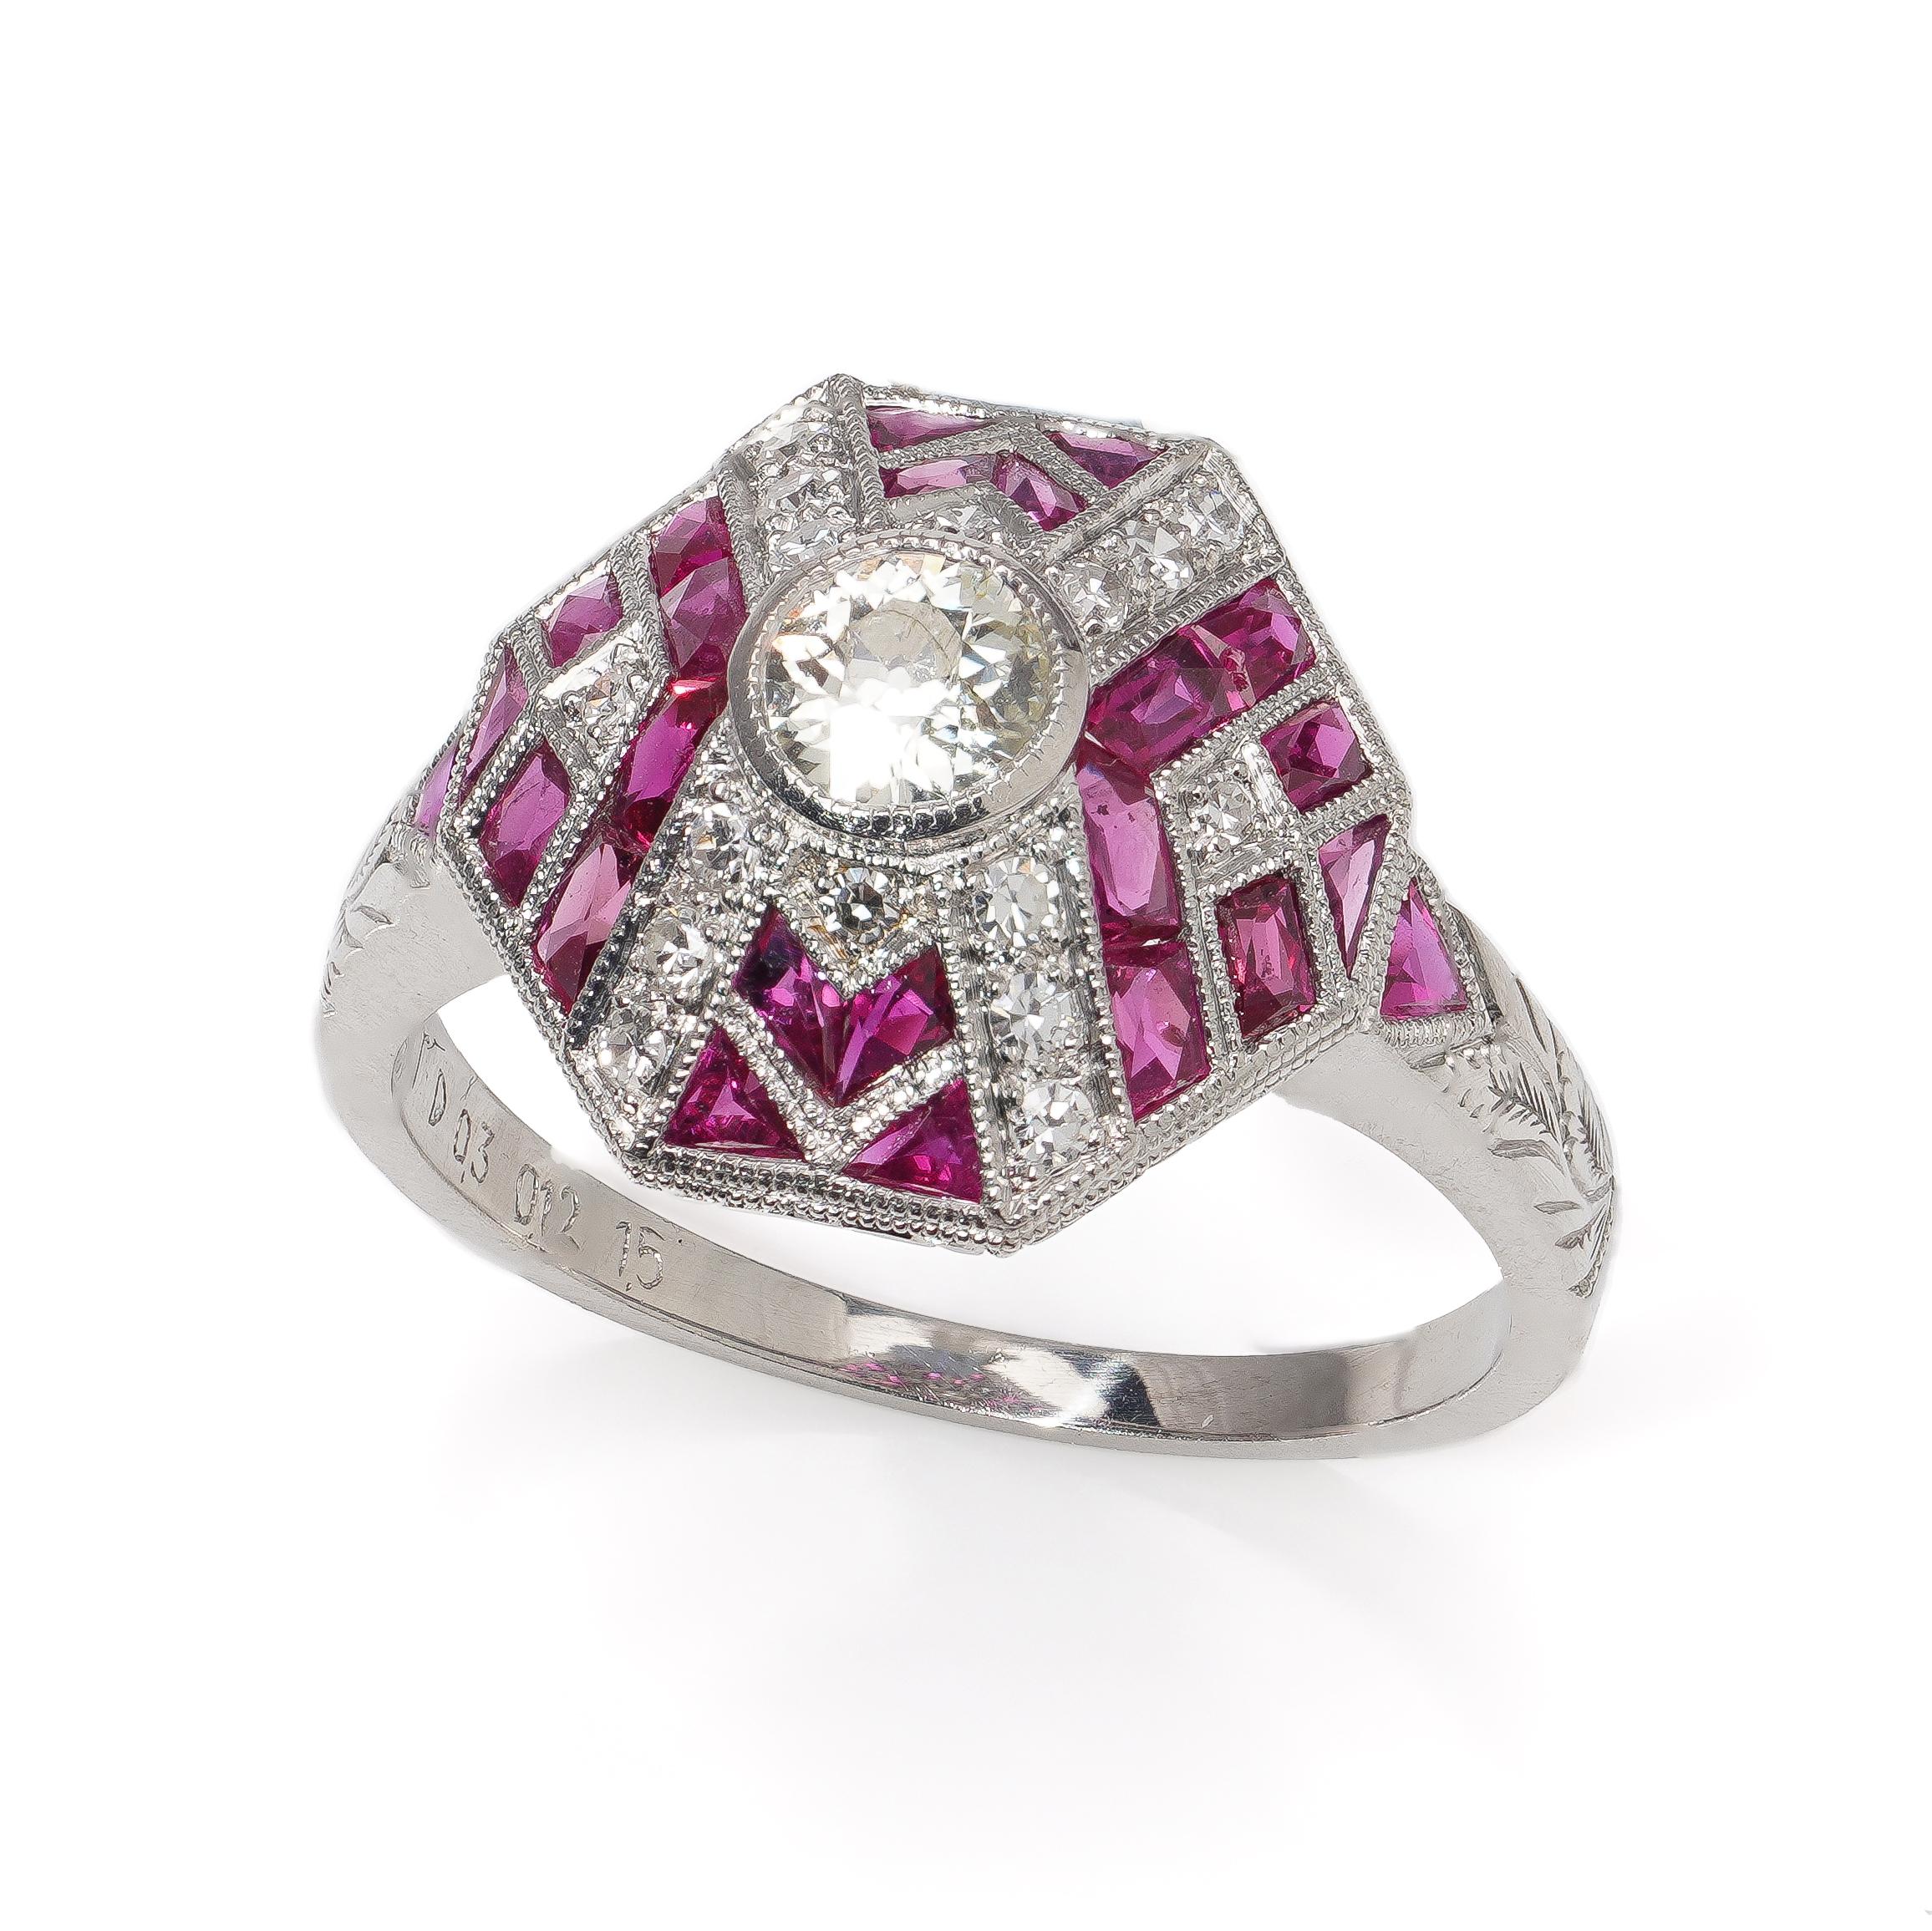 Platinum Art Deco-inspired diamond and ruby ring. 
Ring made in 1980s 
Makers Mark: JoAq 
Hallmarked PLAT 950 - D 0.3 - 0.12 - 1.50 

Dimensions - 
Finger Size (UK) = N (US) = 7 (EU) = 54 
Weight : 5.87 grams 
Size : 2.7 x 2.1 x 1.4 cm 

Diamonds -